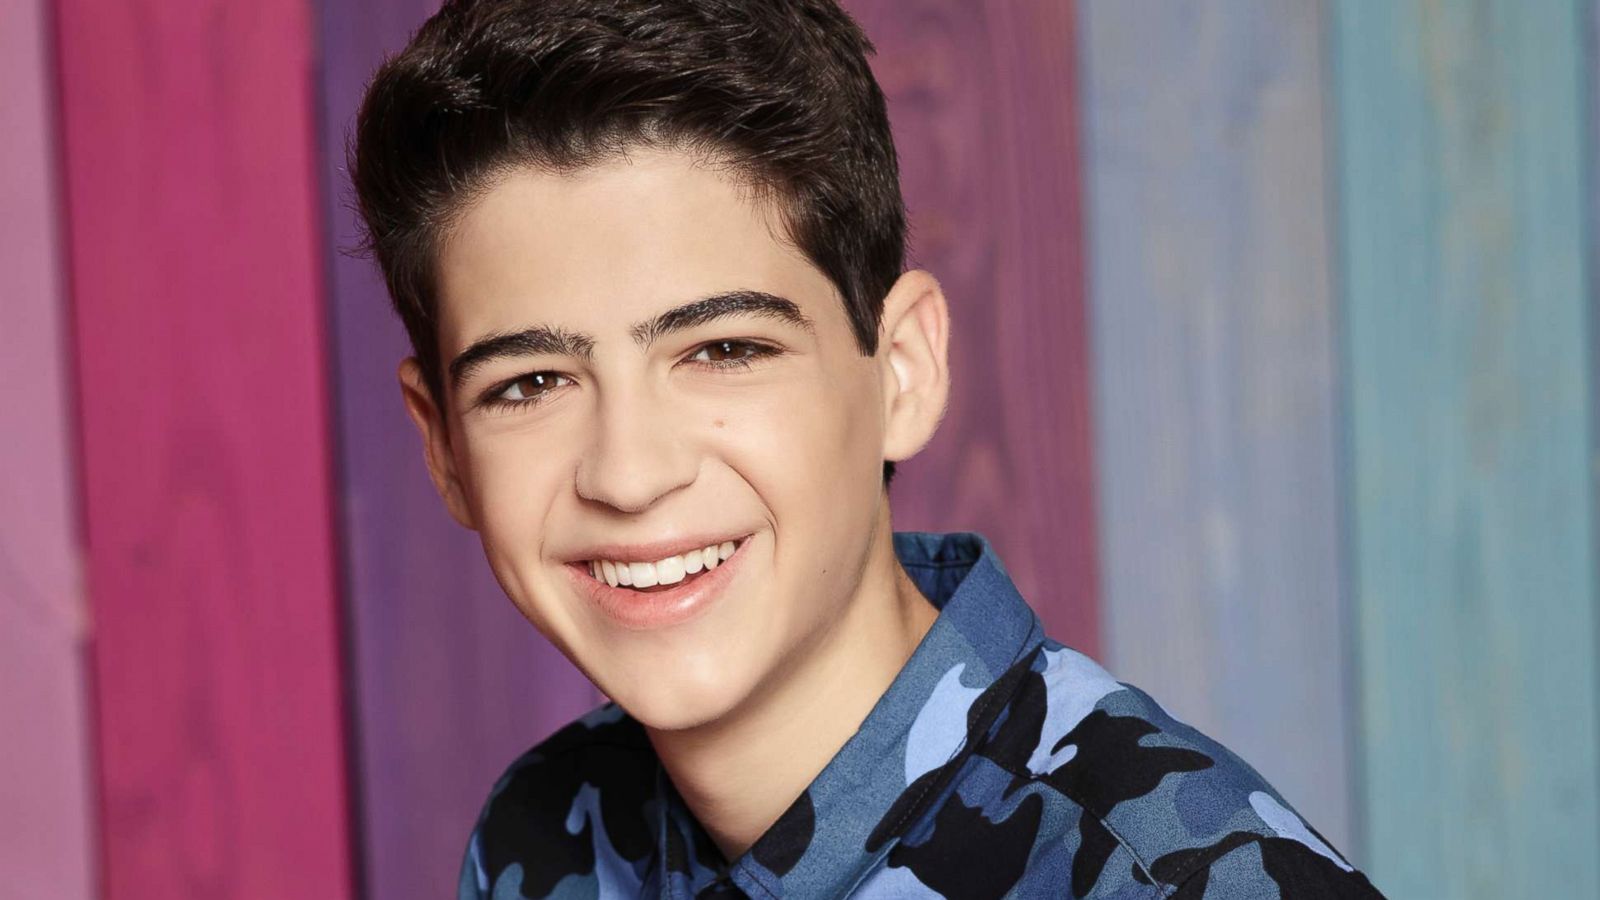 Andi Mack' makes history with first Disney Channel character to say 'I'm  gay' - Good Morning America